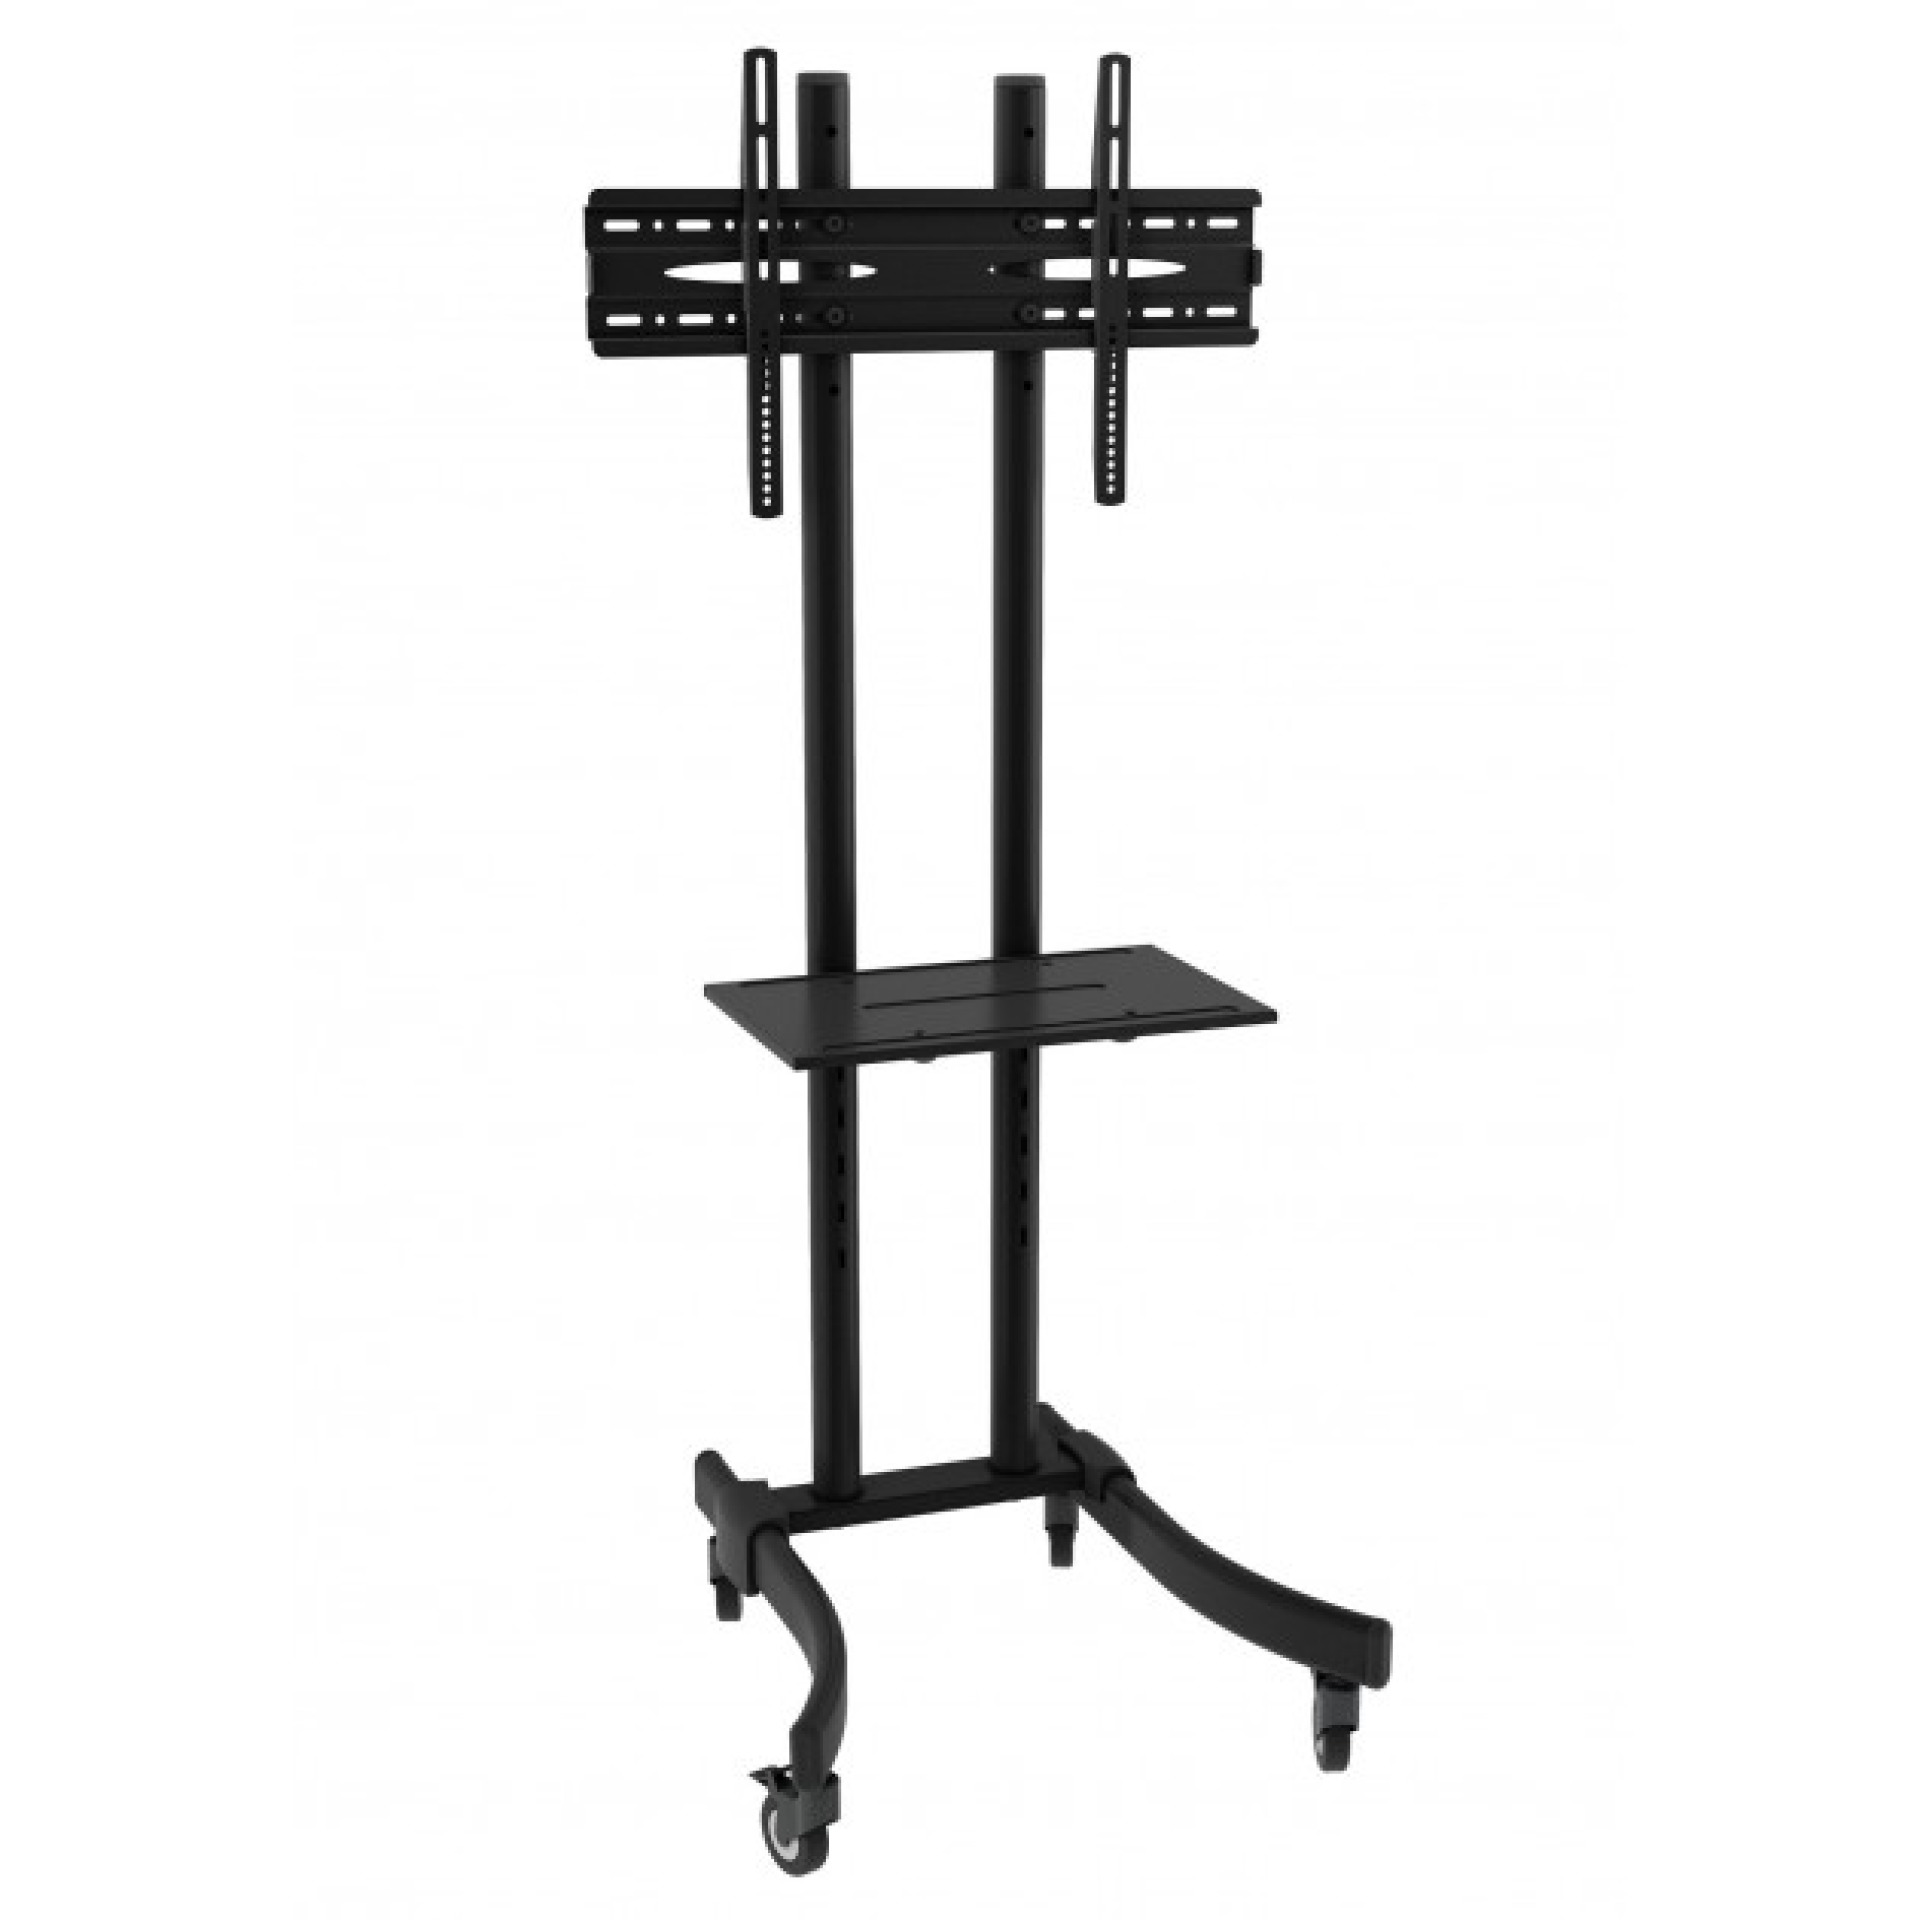 Trolley floor support for LCD LED TV 32-70", with shelf